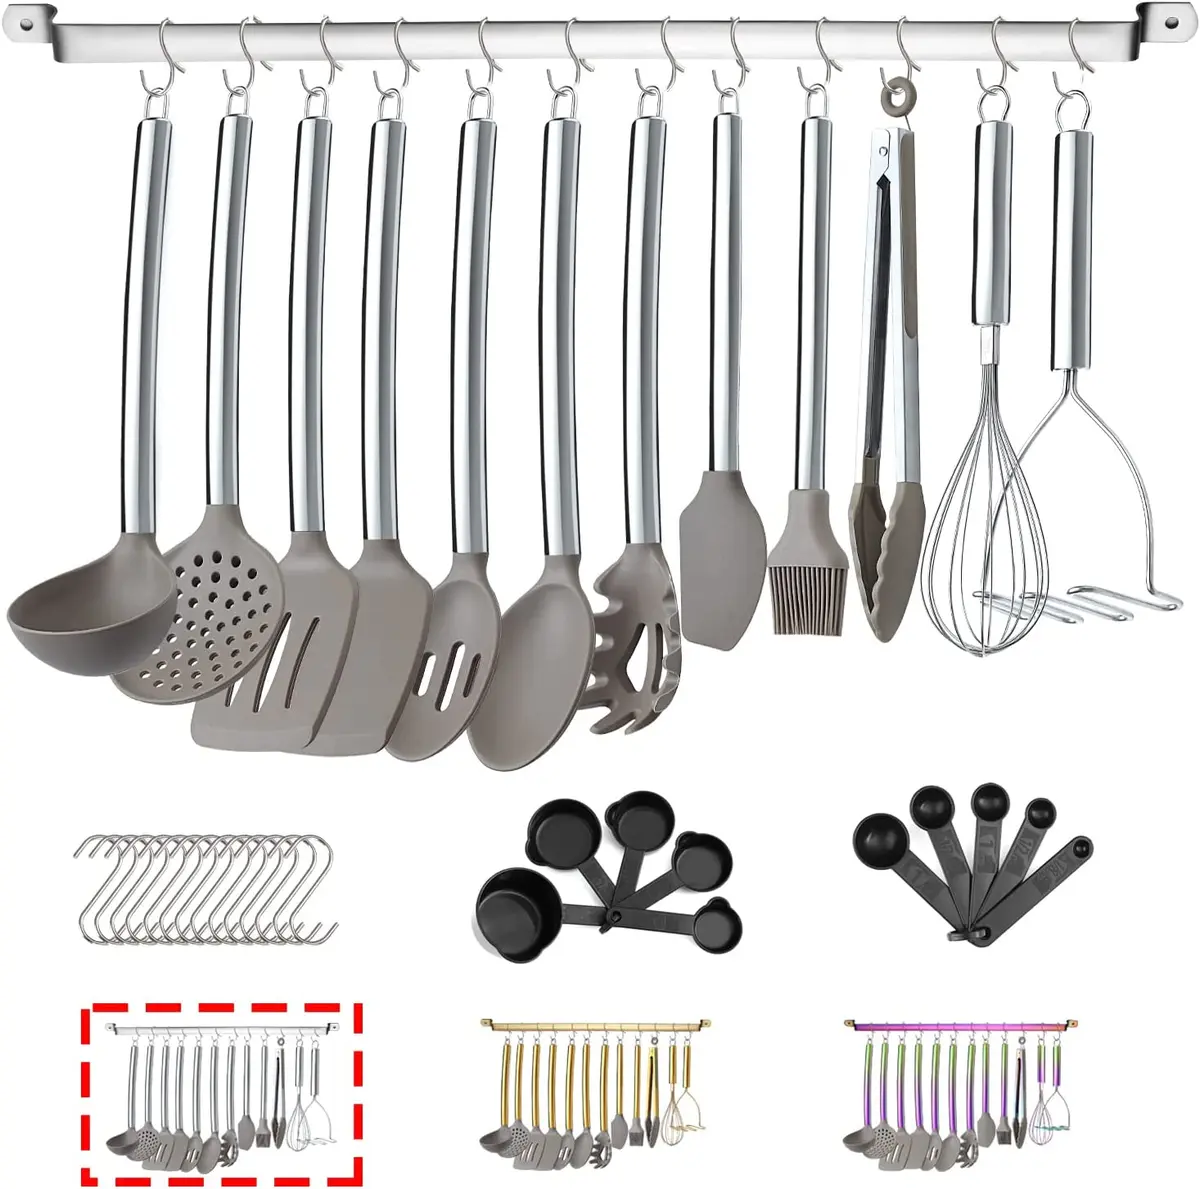 Kitchen - Kitchen Tools - Cooking Utensils - KitchenAid Silicone 5-Piece  Set - Online Shopping for Canadians